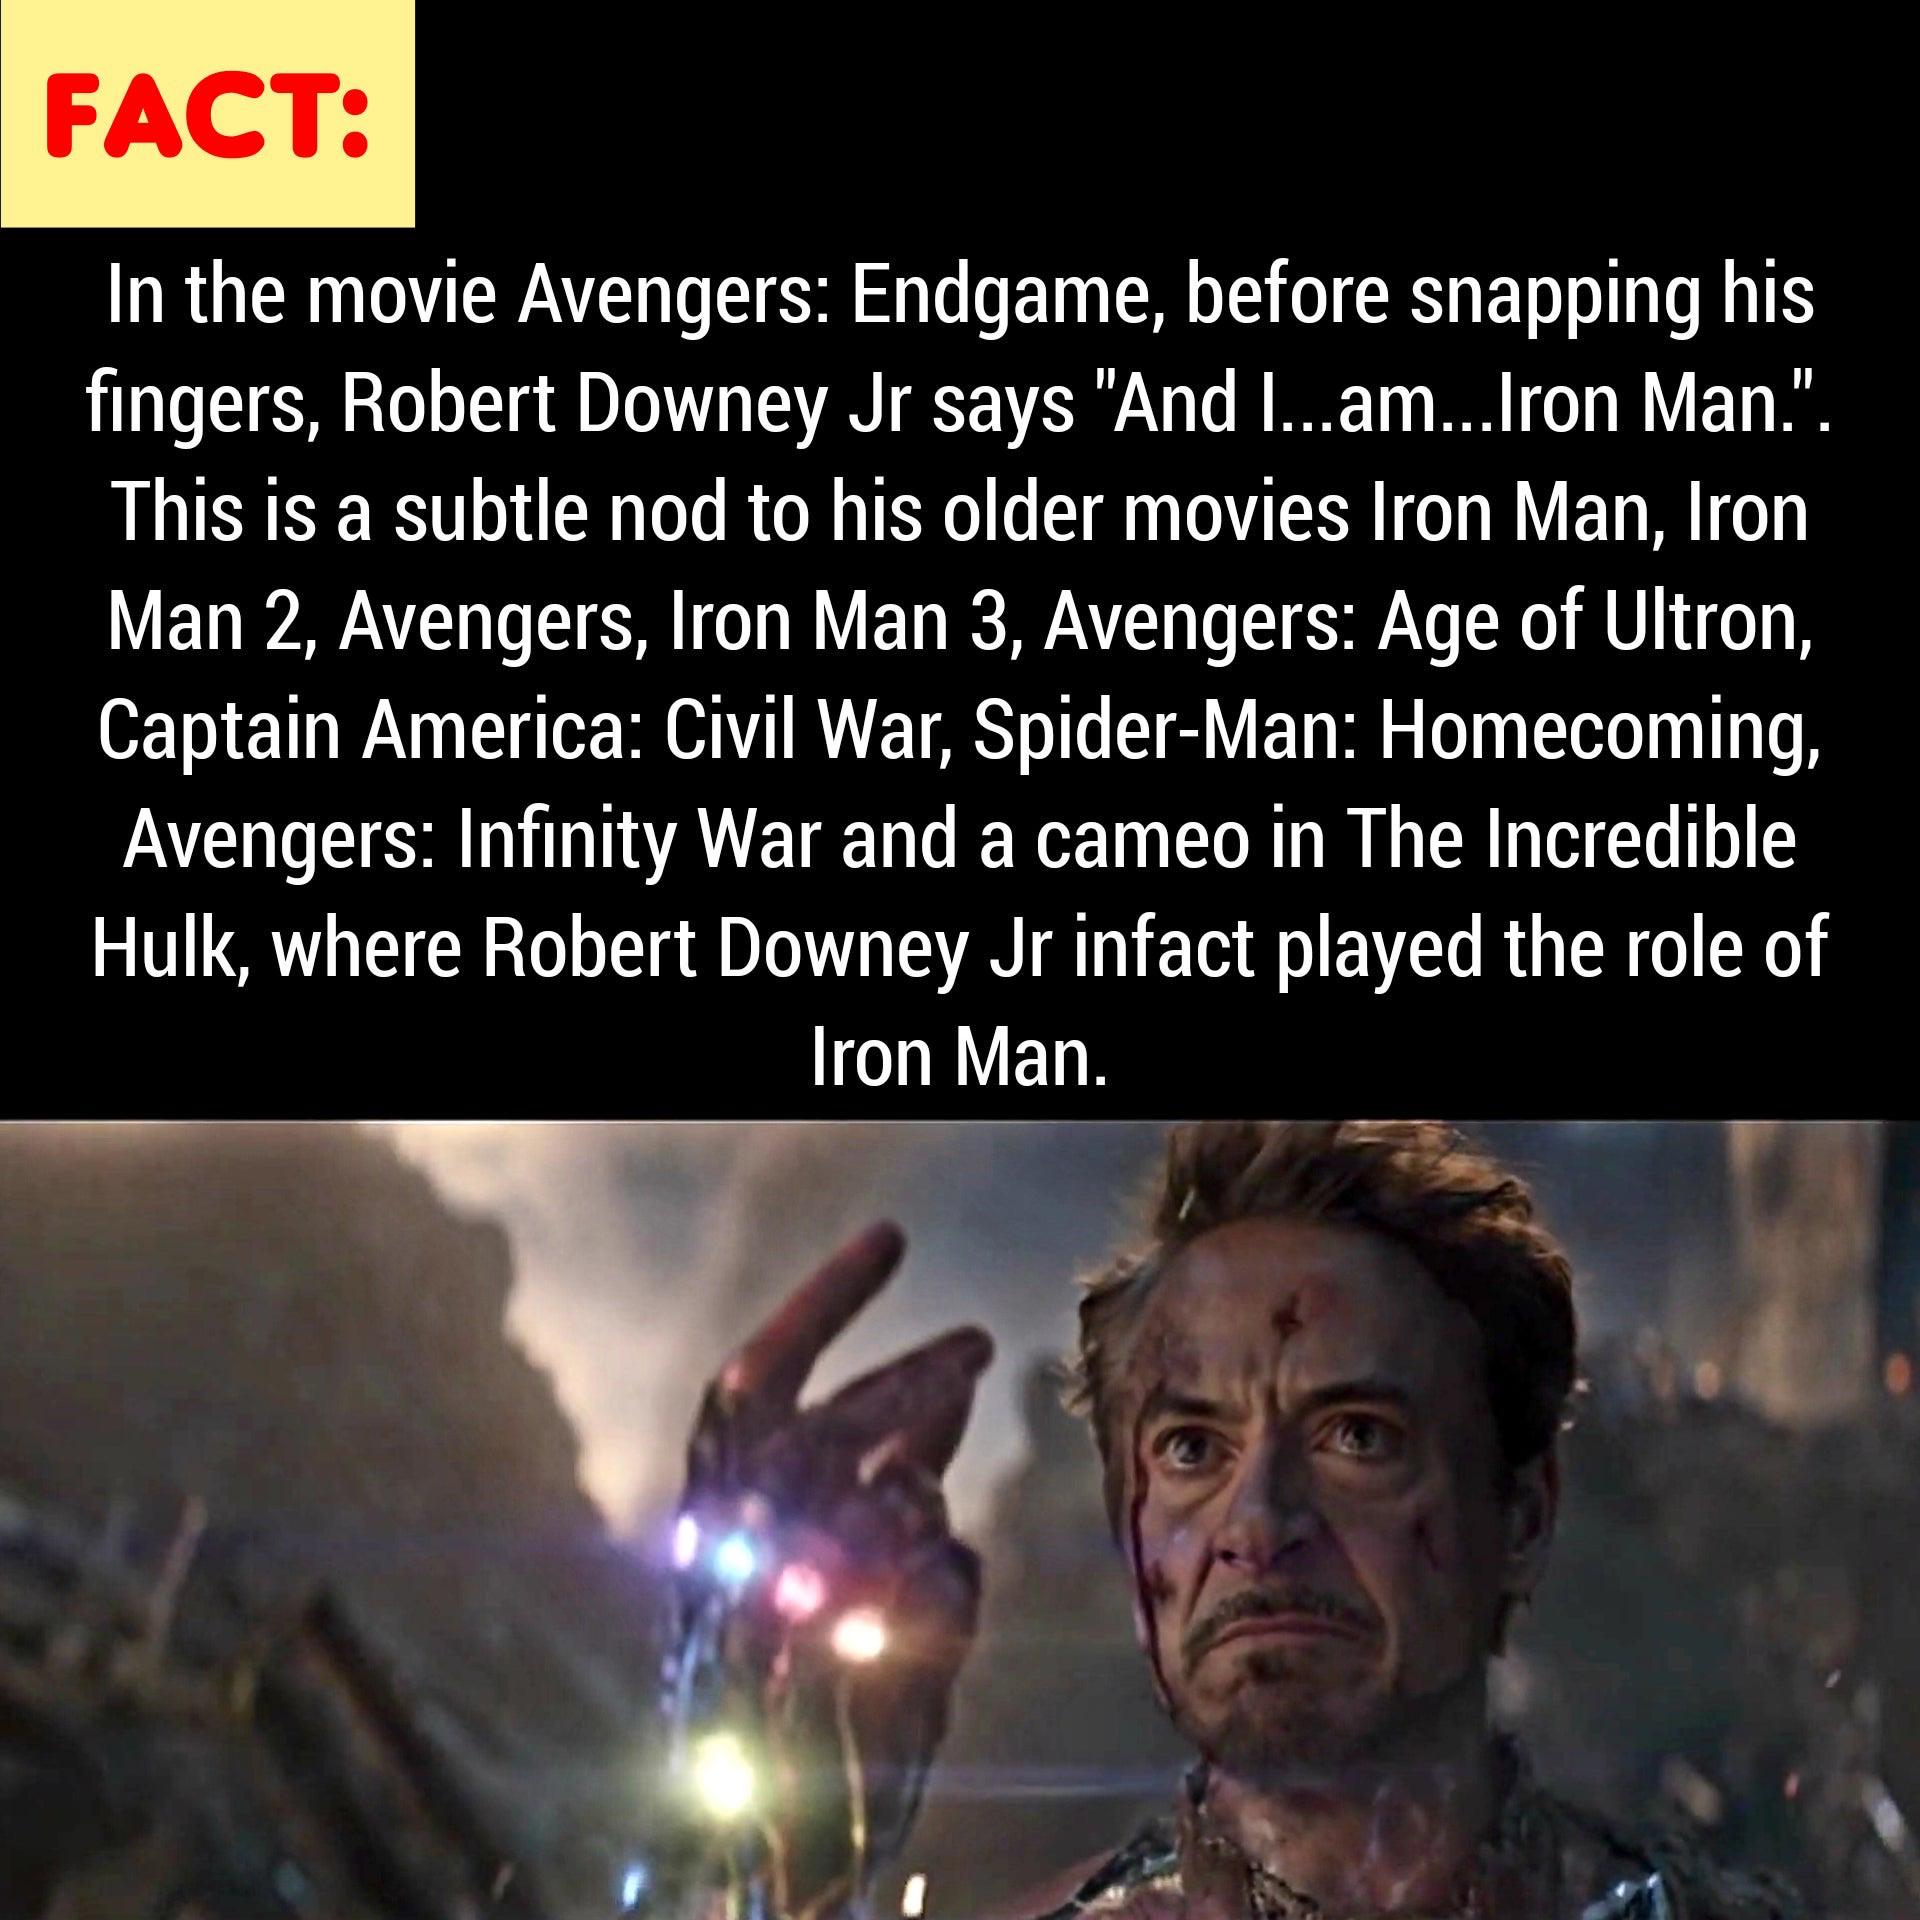 thanos avengers-memes thanos text: FACT: In the movie Avengers: Endgame, before snapping his fingers, Robert Downey Jr says 